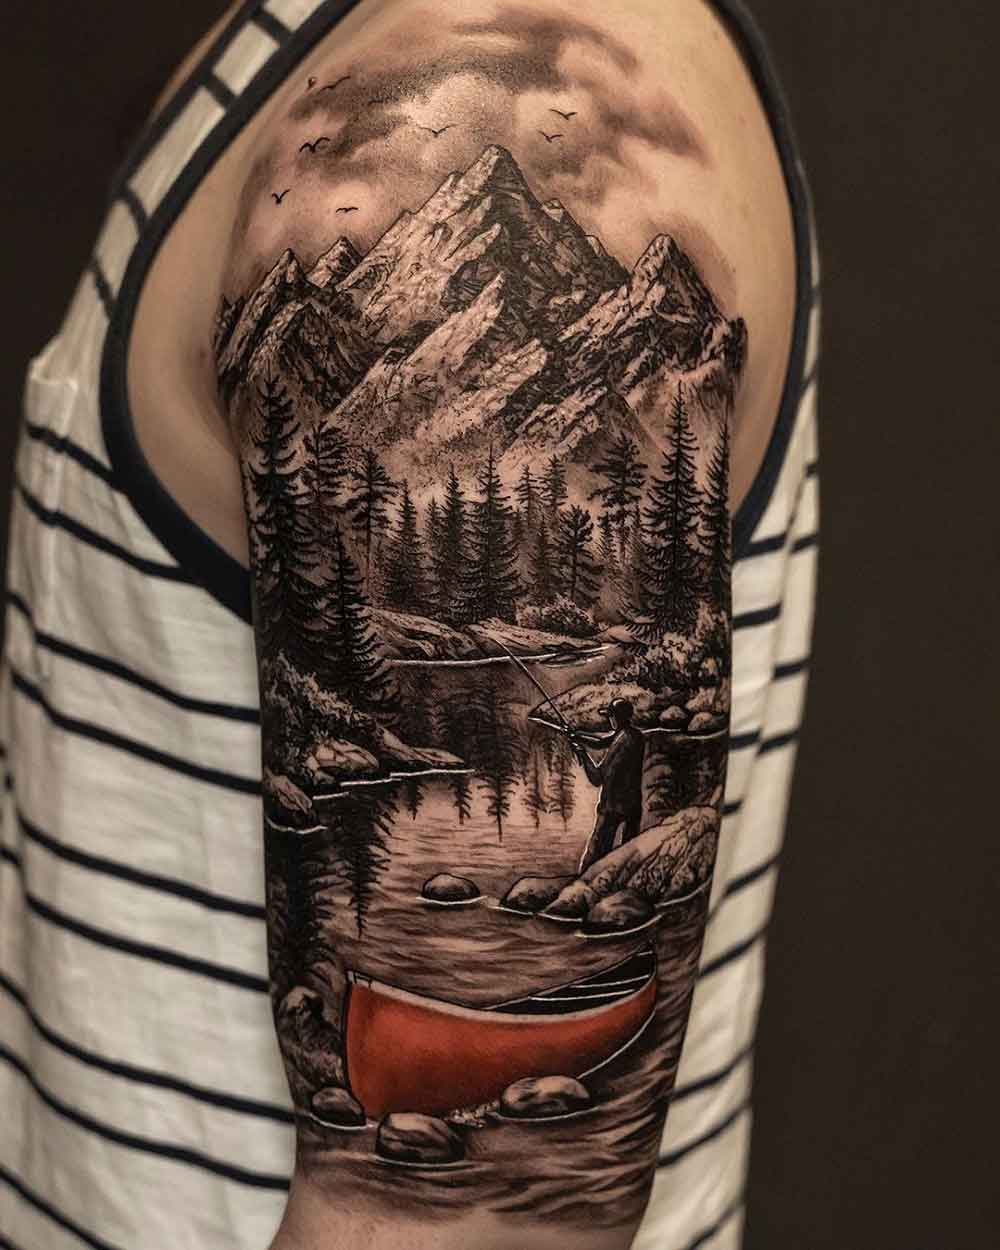 Half of Tennessee is burning down but were still here tattooing Heres  an awesome tattoo by Jon Overton to brighten   Tennessee tattoo Tattoos  Sleeve tattoos